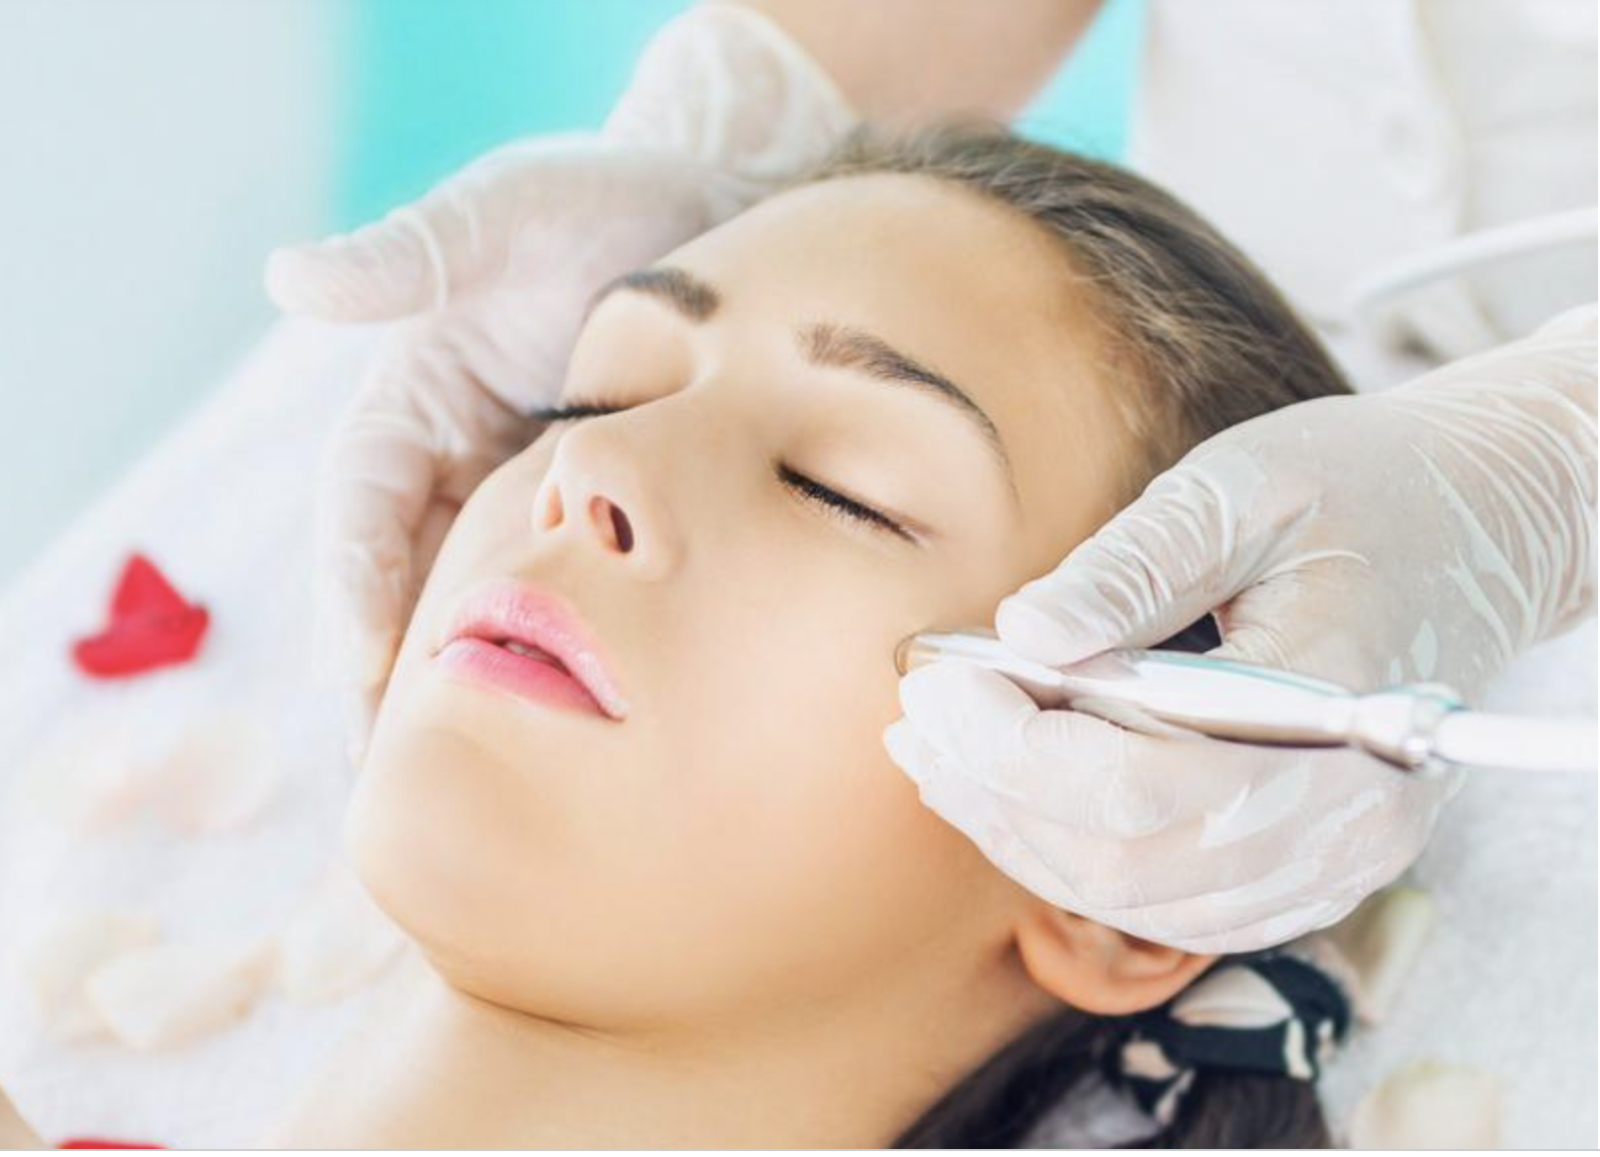 Guest Blog: Benefits of Microdermabrasion